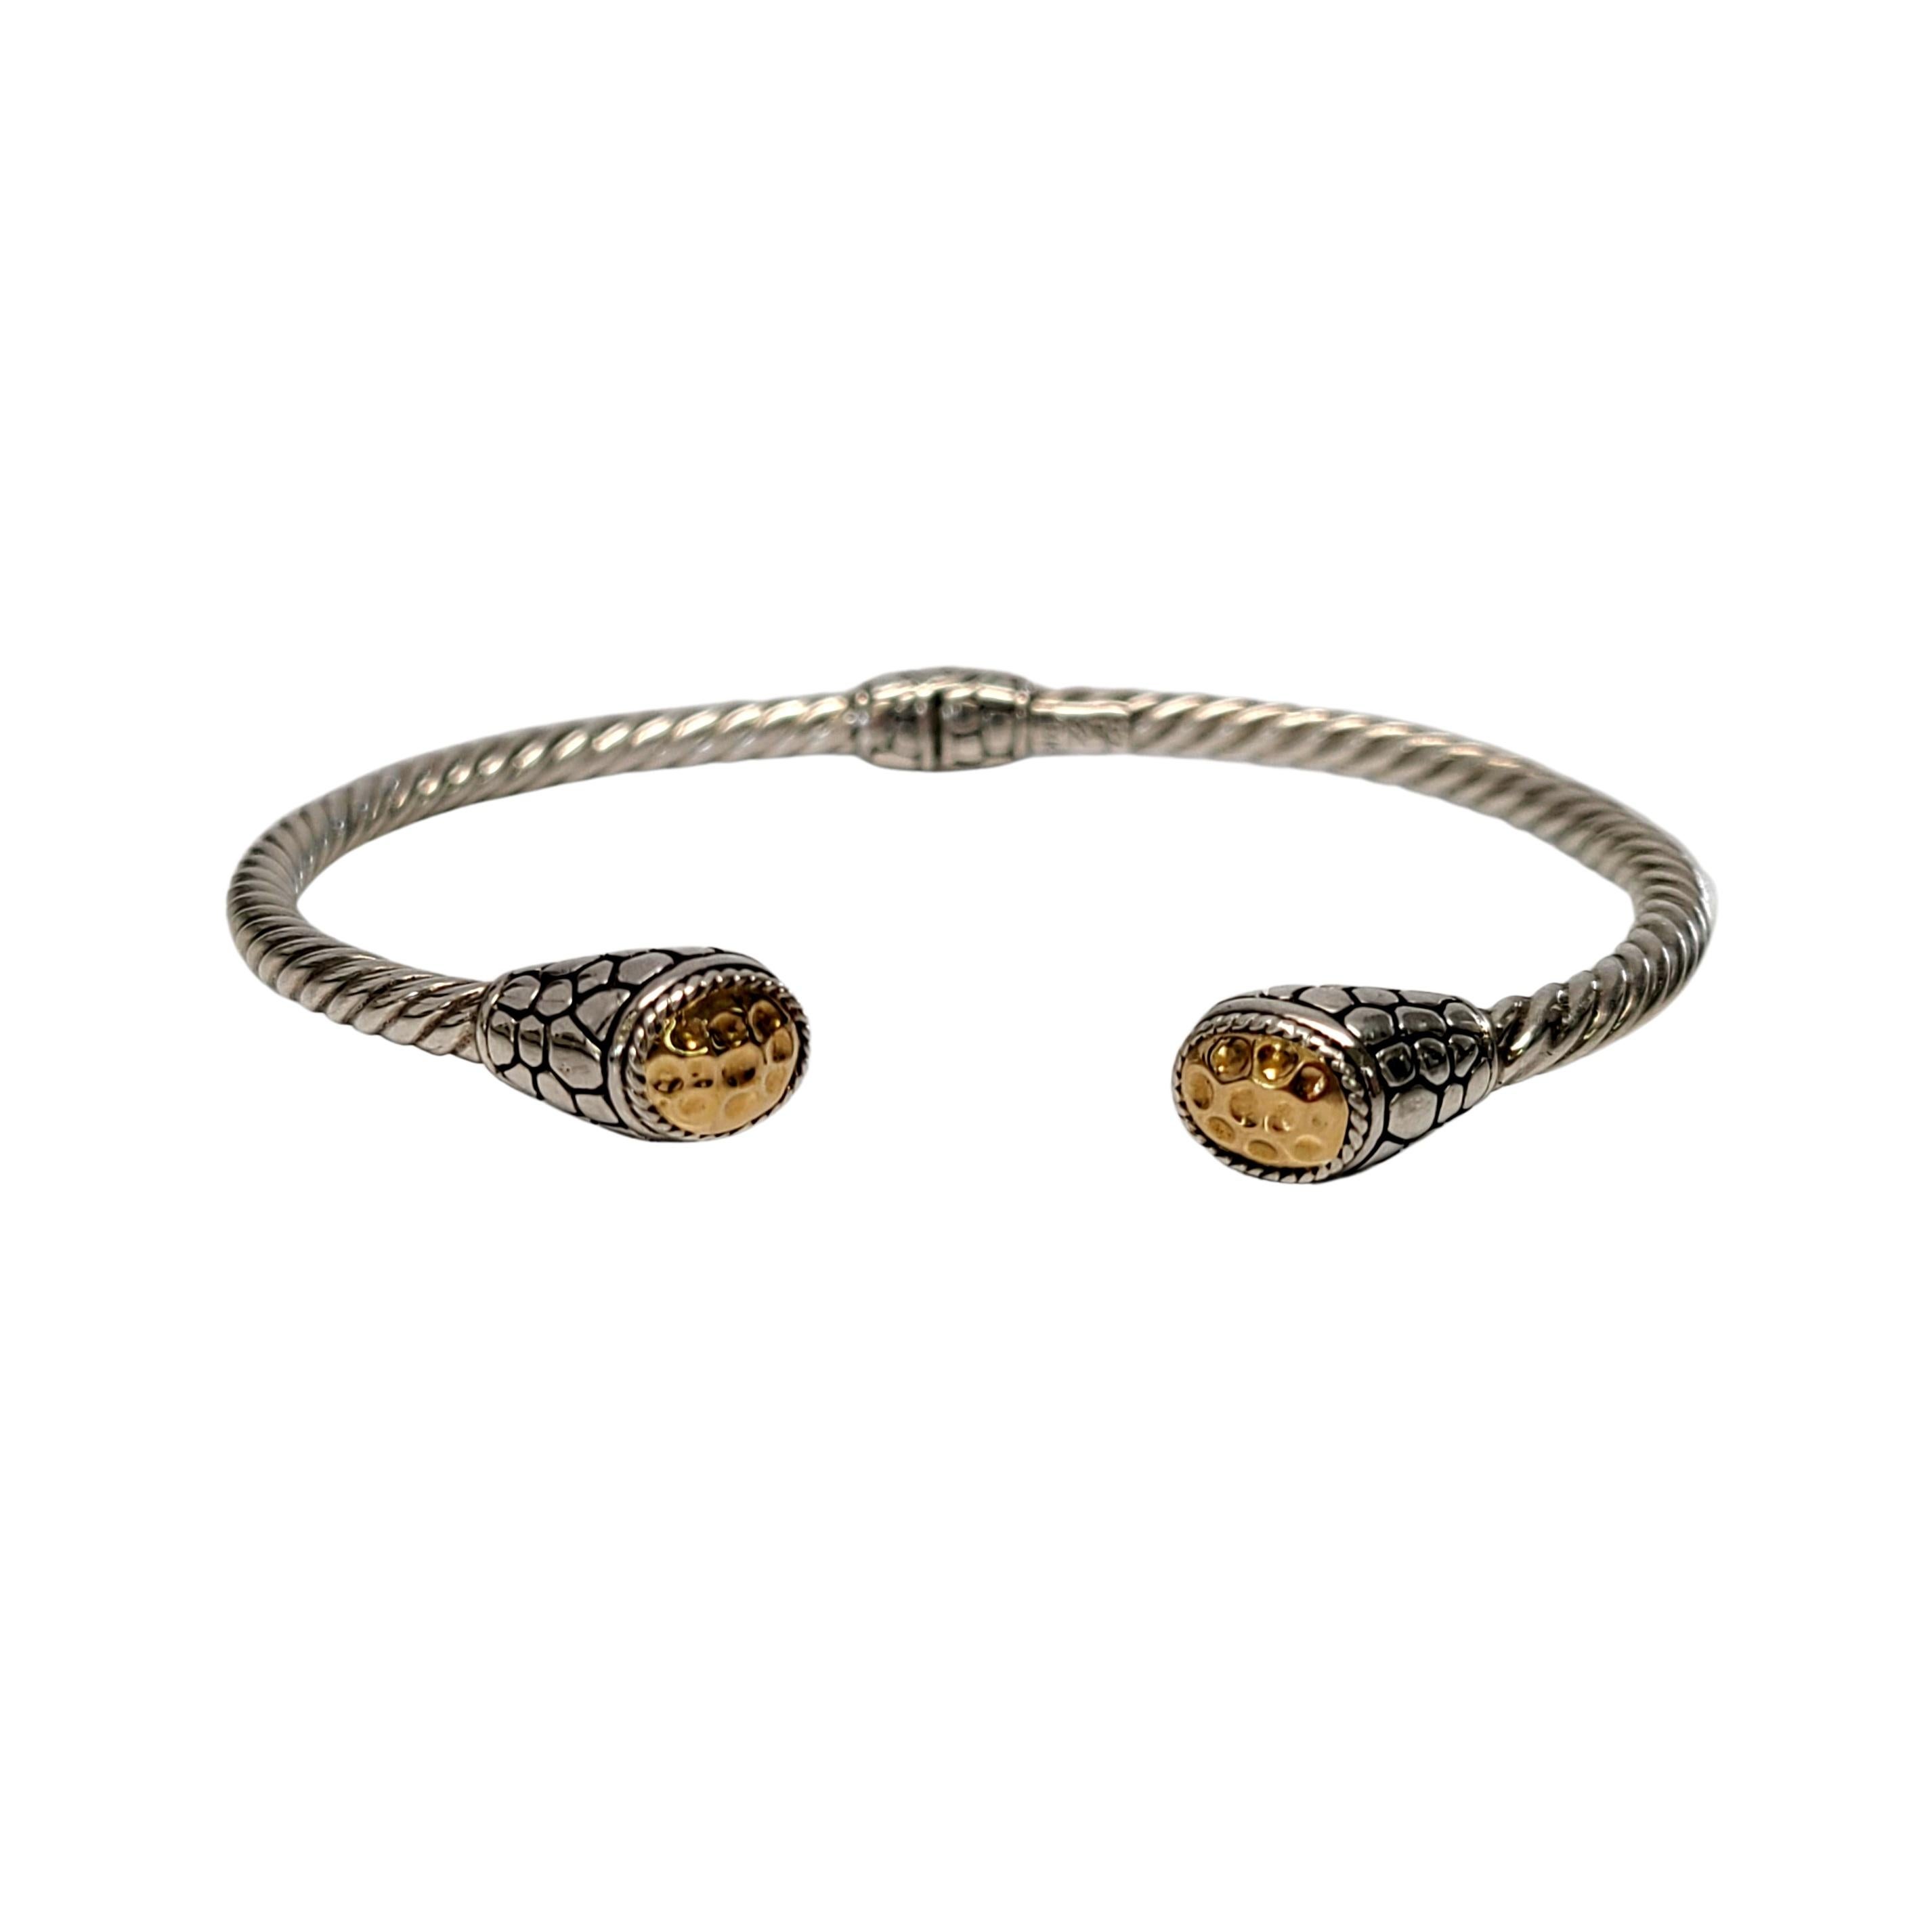 Sterling silver and 18K gold accent hinged cuff bracelet.

Designer artisan piece featuring a hinged twisted cable cuff with pebble design ends and 18K yellow gold hammered accent end caps.

Measures approx 6 1/2